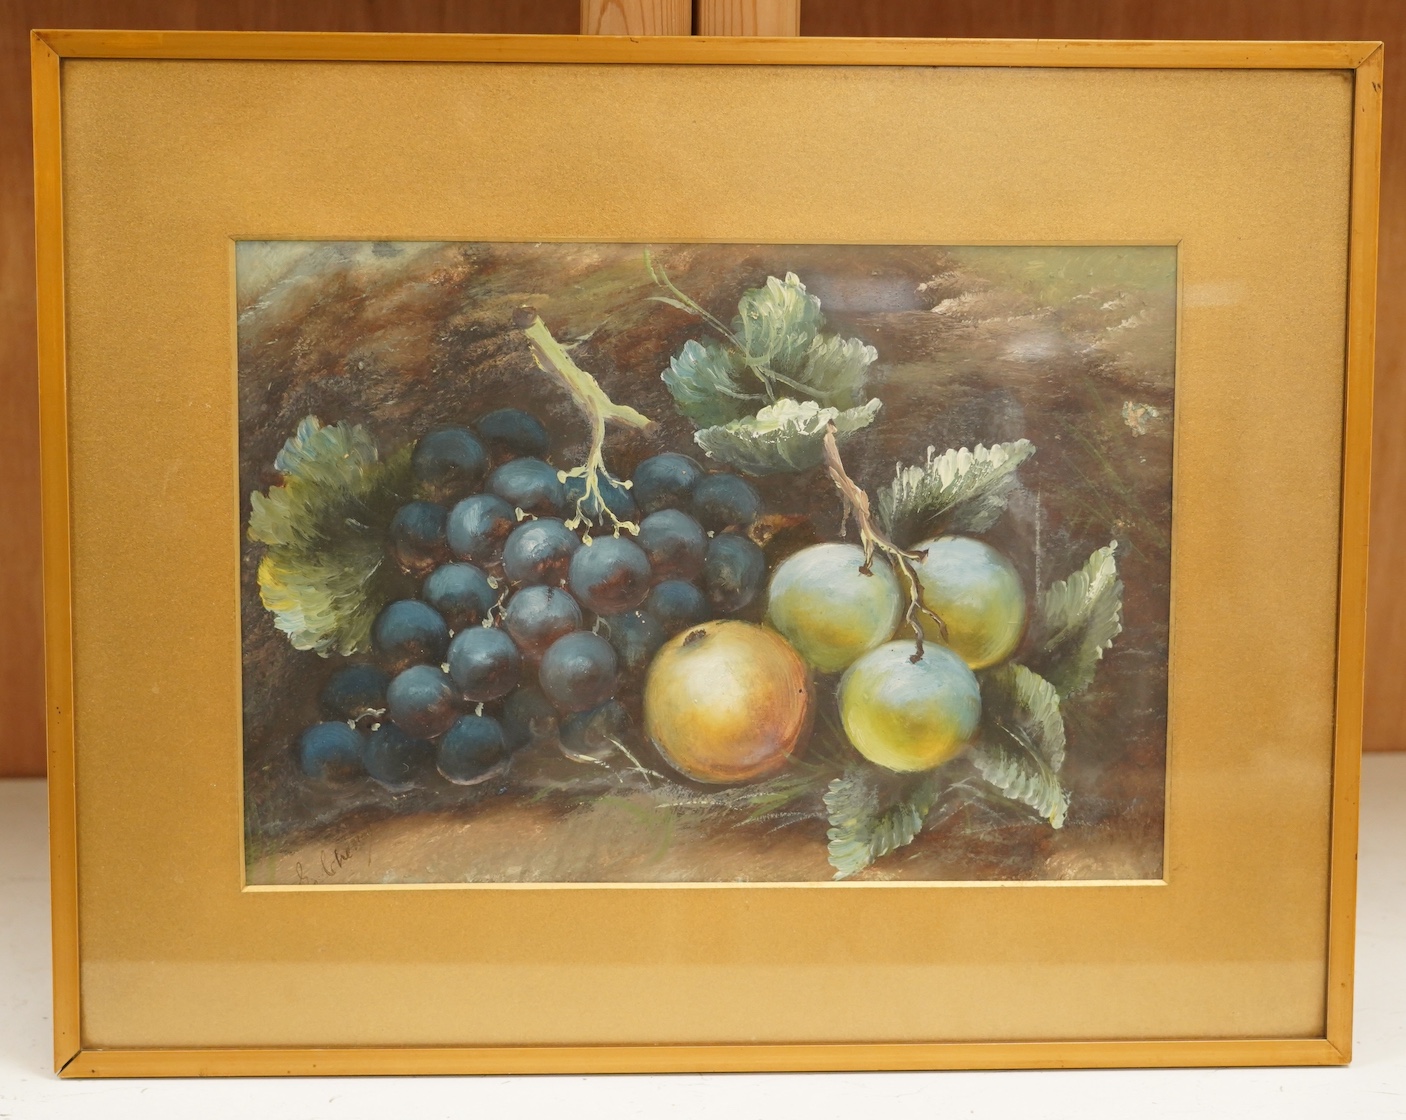 Late 19th / early 20th century English School, pair of watercolours, Still lifes of fruit, each indistinctly signed lower left, 23 x 32cm. Condition - fair